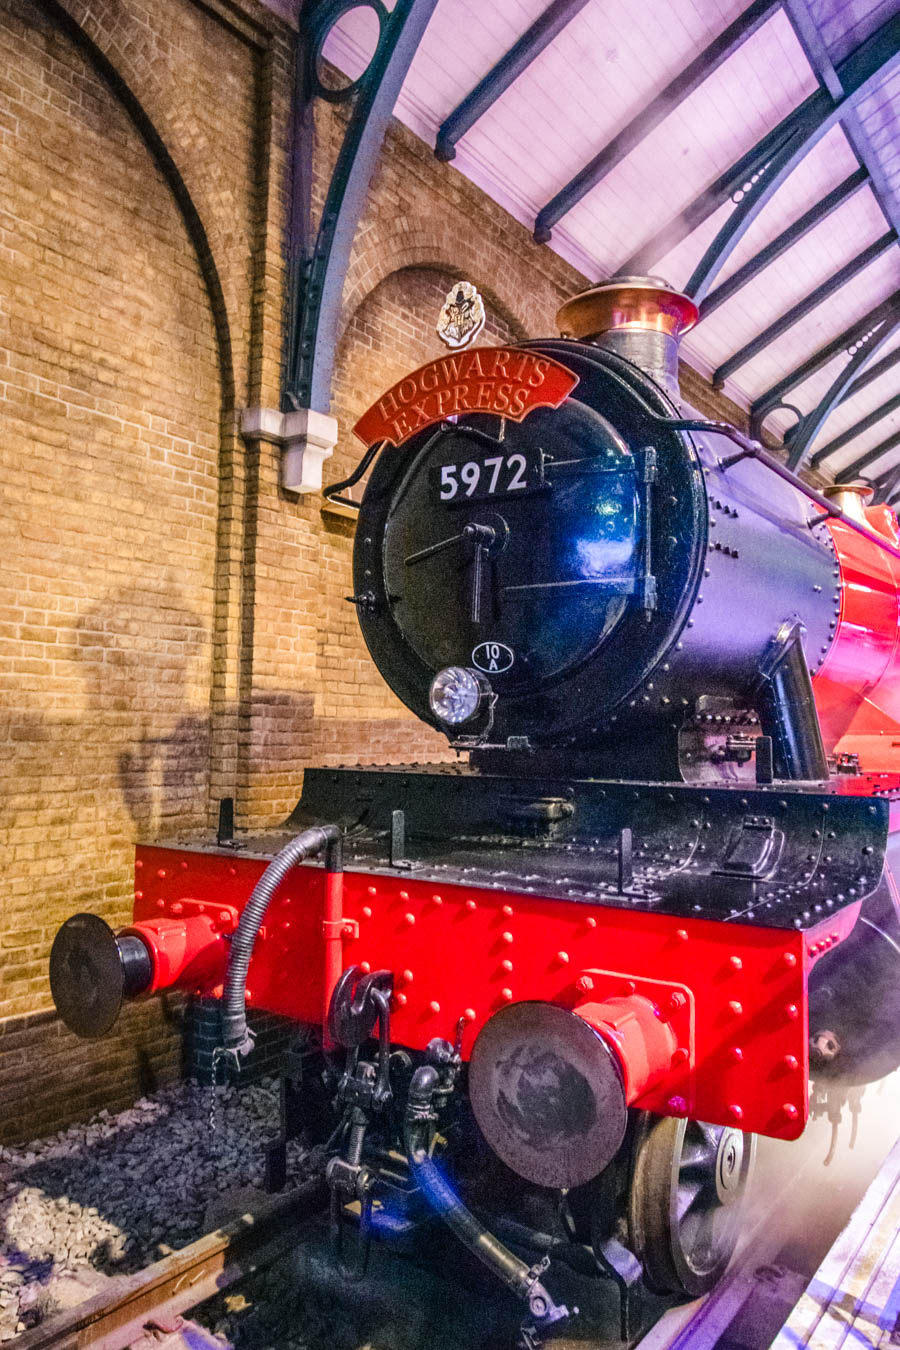 Discover the top Harry Potter tours in London and immerse yourself in the enchanting world of Harry Potter with these magical guided tours.